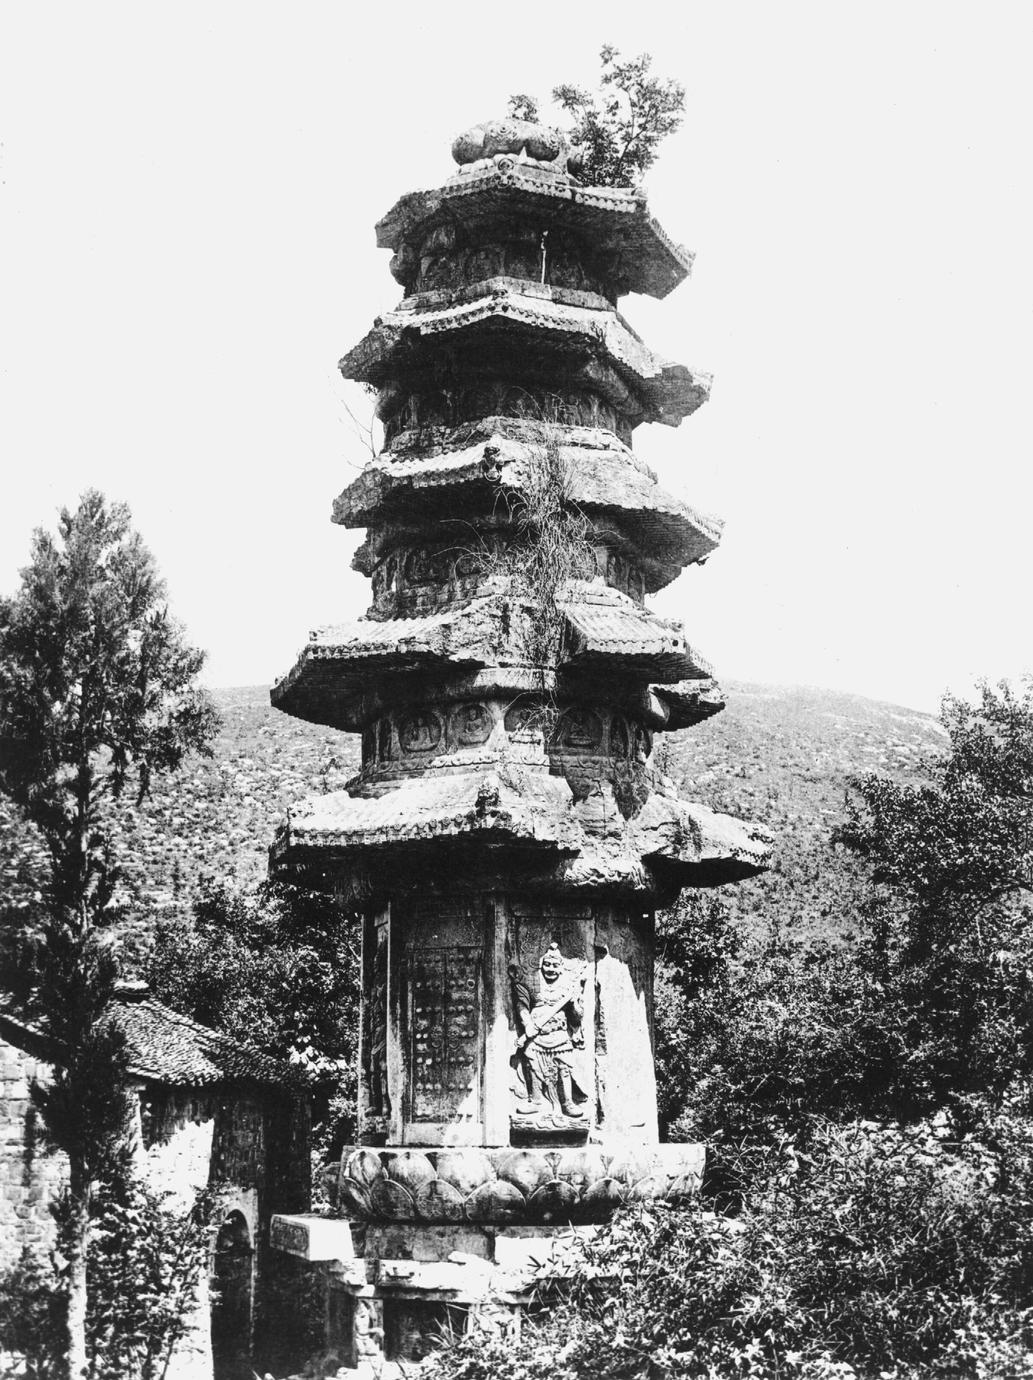 A partially destroyed stone pagoda at Qixia Shan (Qixia Hill) 棲霞山 before reconstruction.